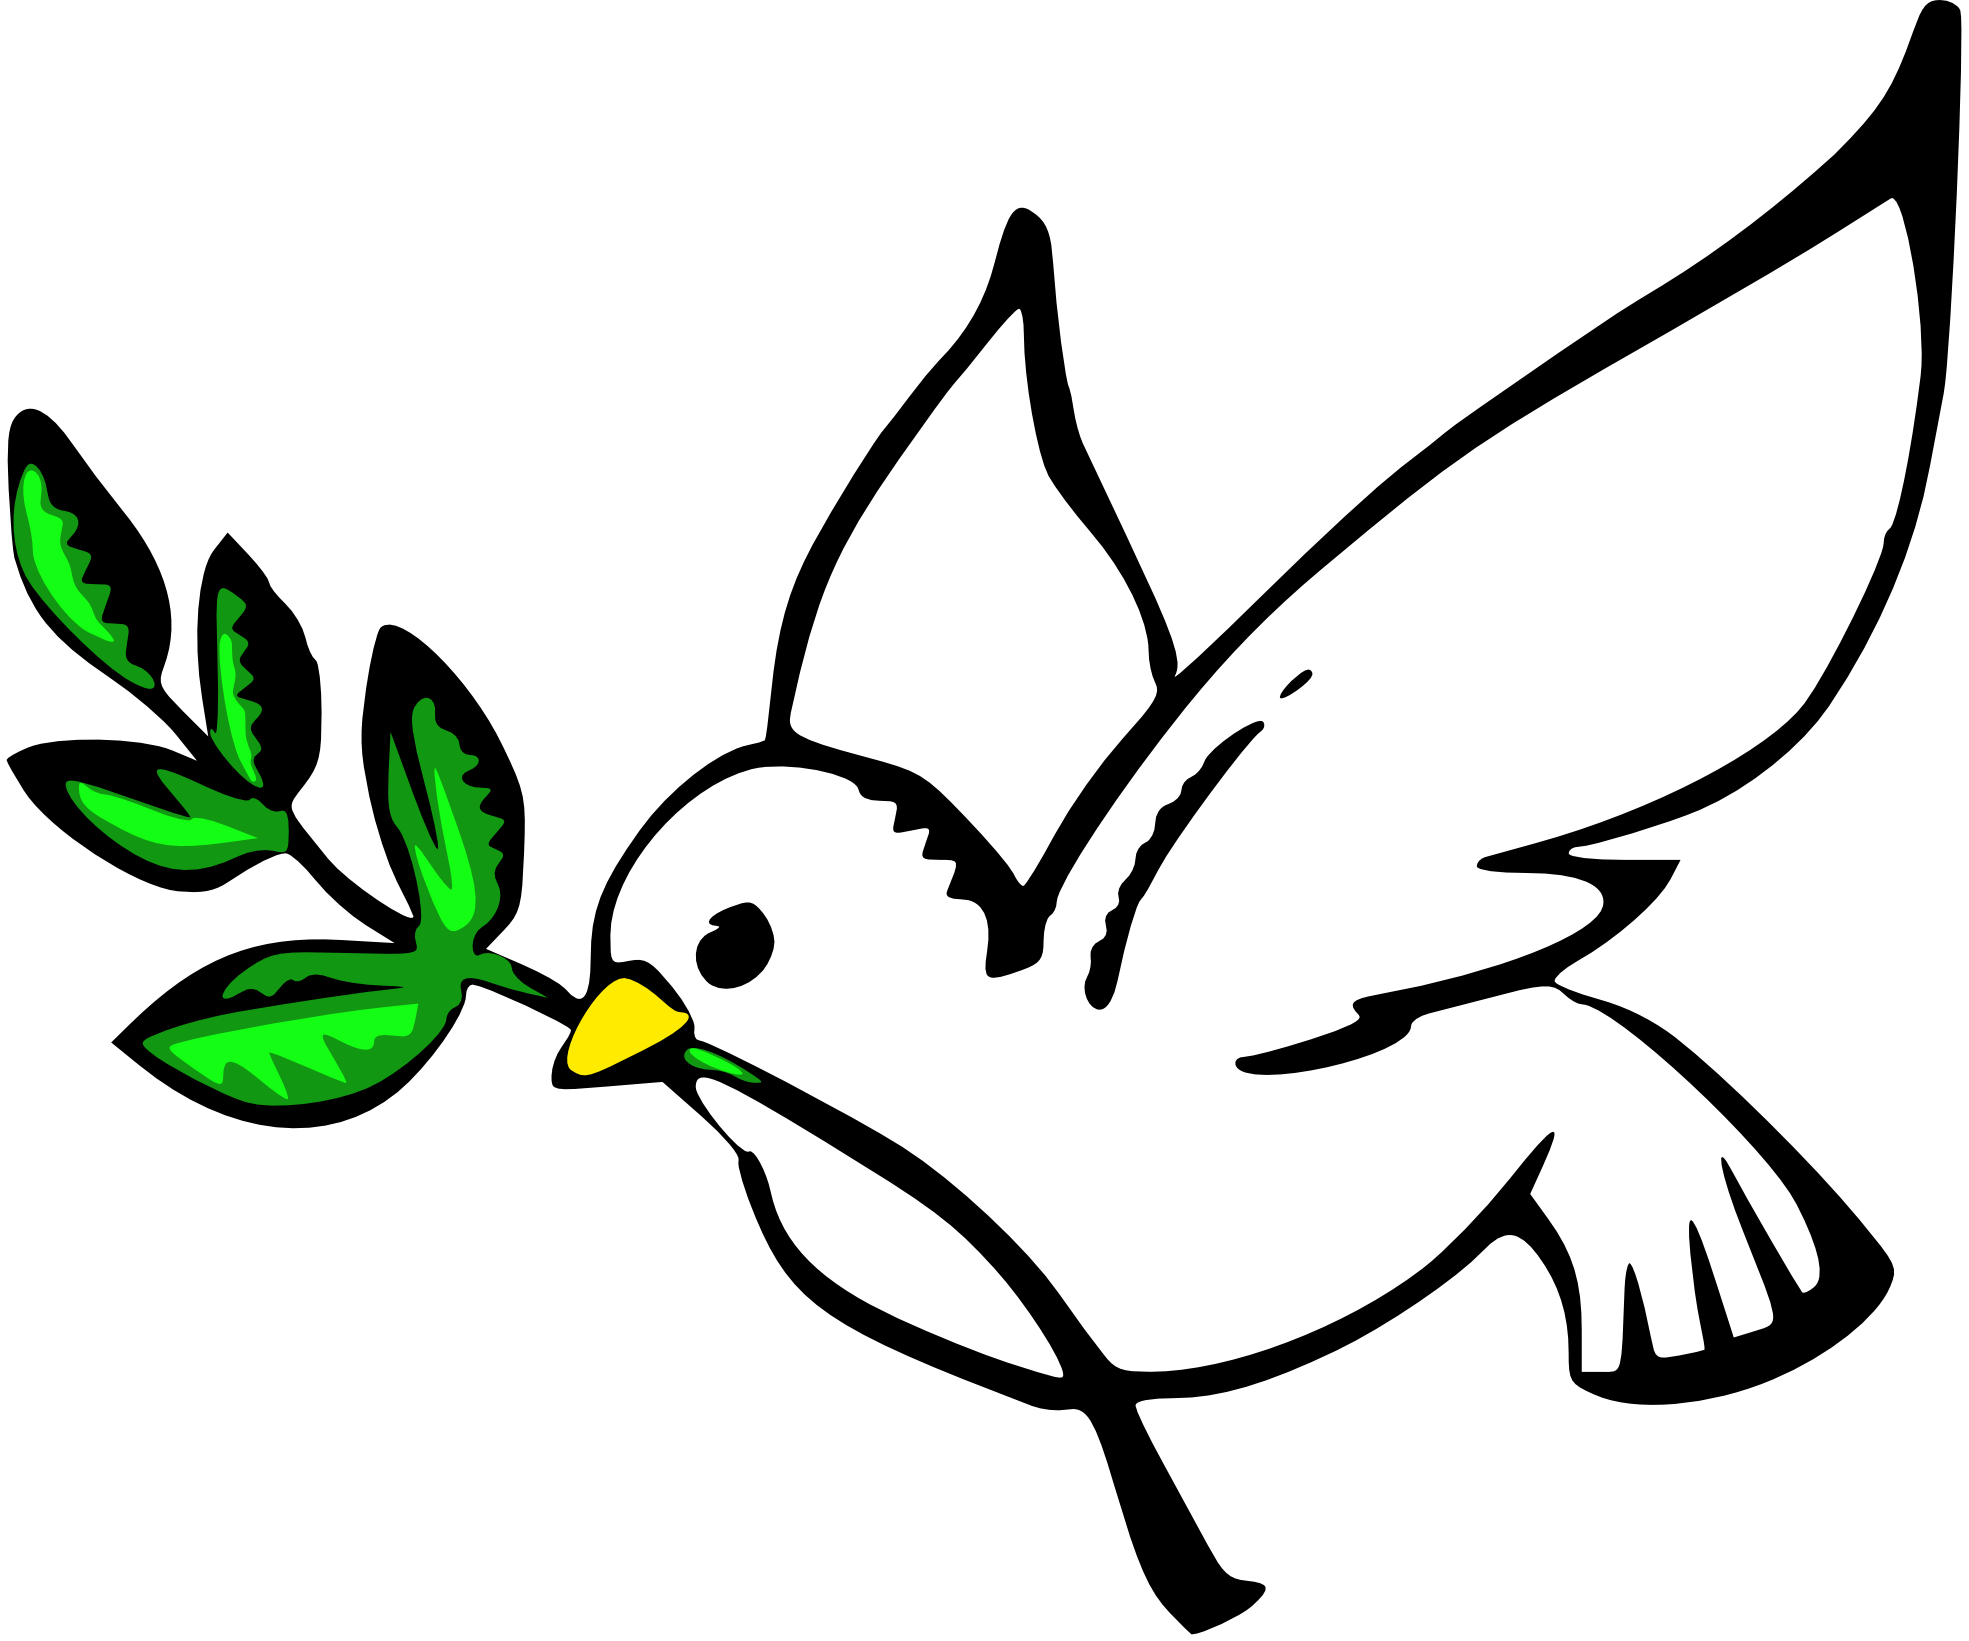 free christian clipart of doves - photo #16